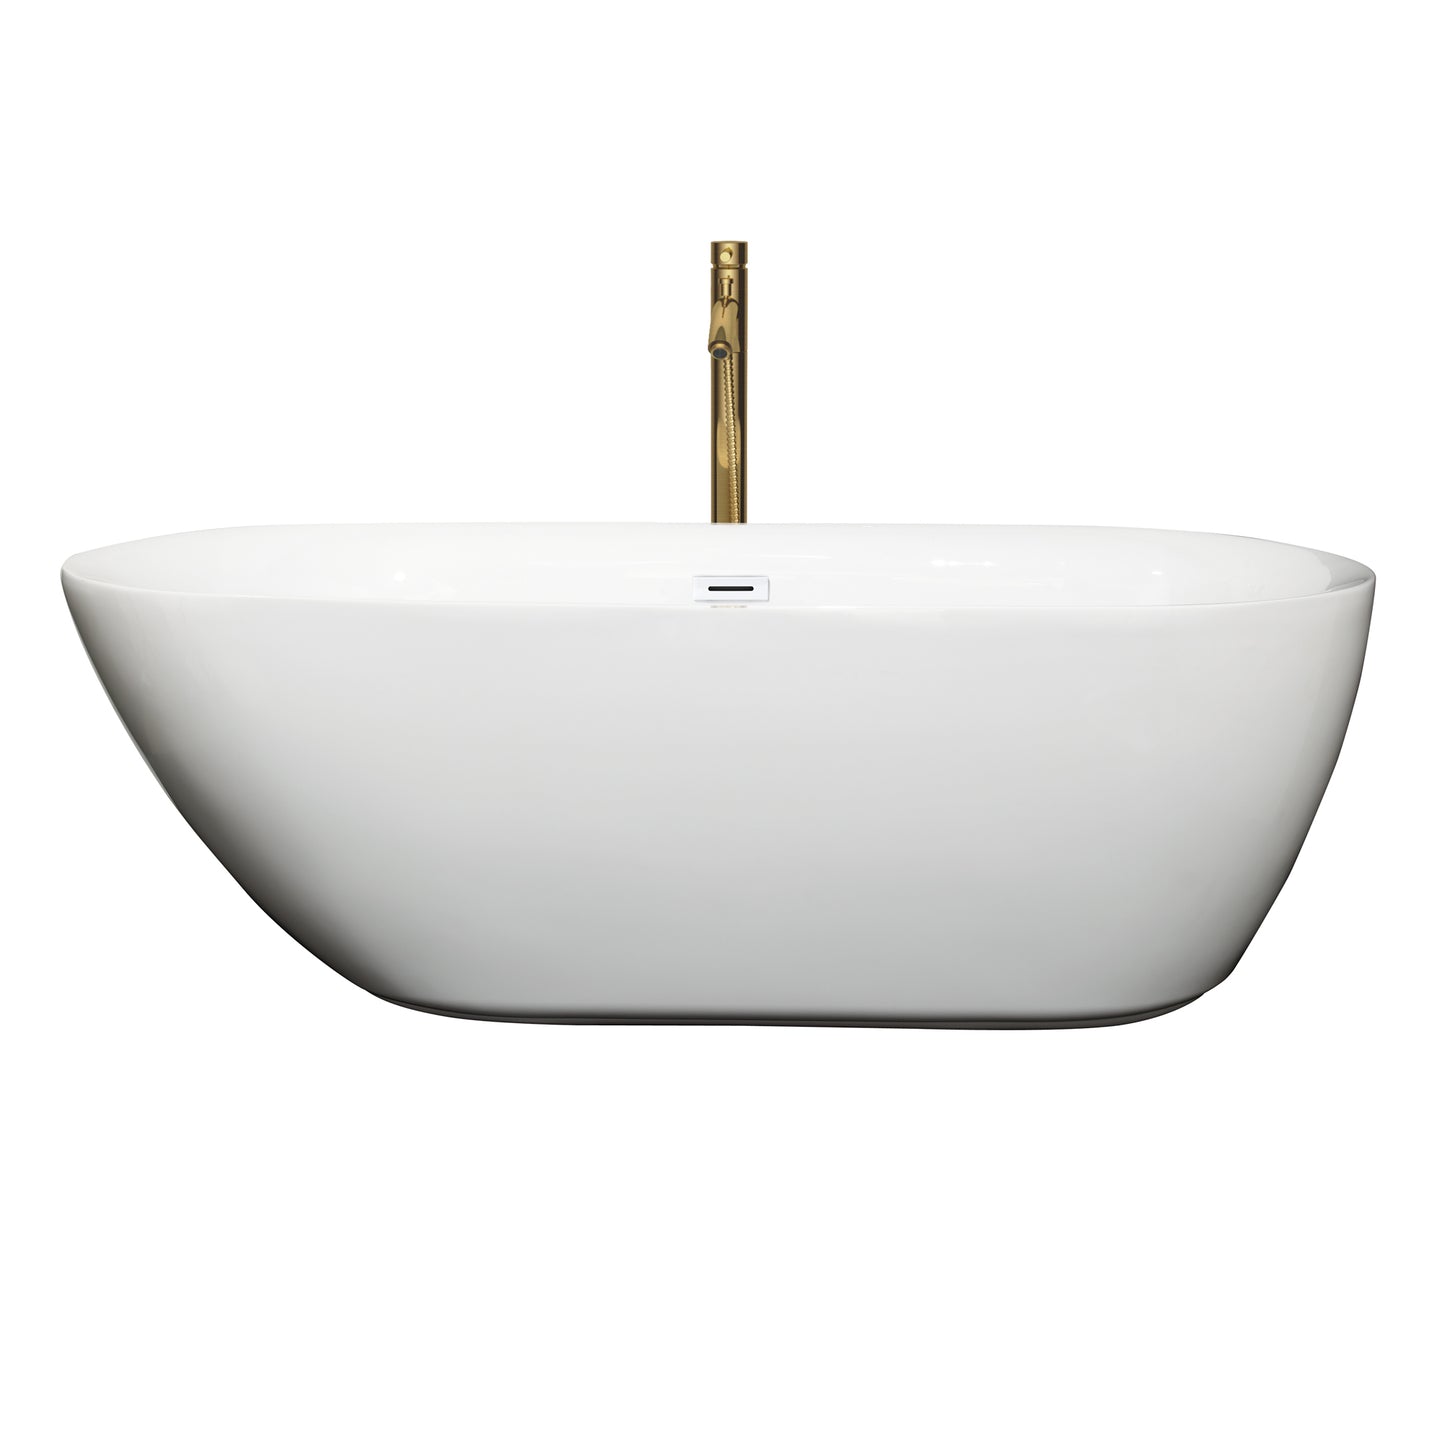 Wyndham Collection Melissa 65 Inch Freestanding Bathtub in White with Floor Mounted Faucet, Drain and Overflow Trim - Luxe Bathroom Vanities